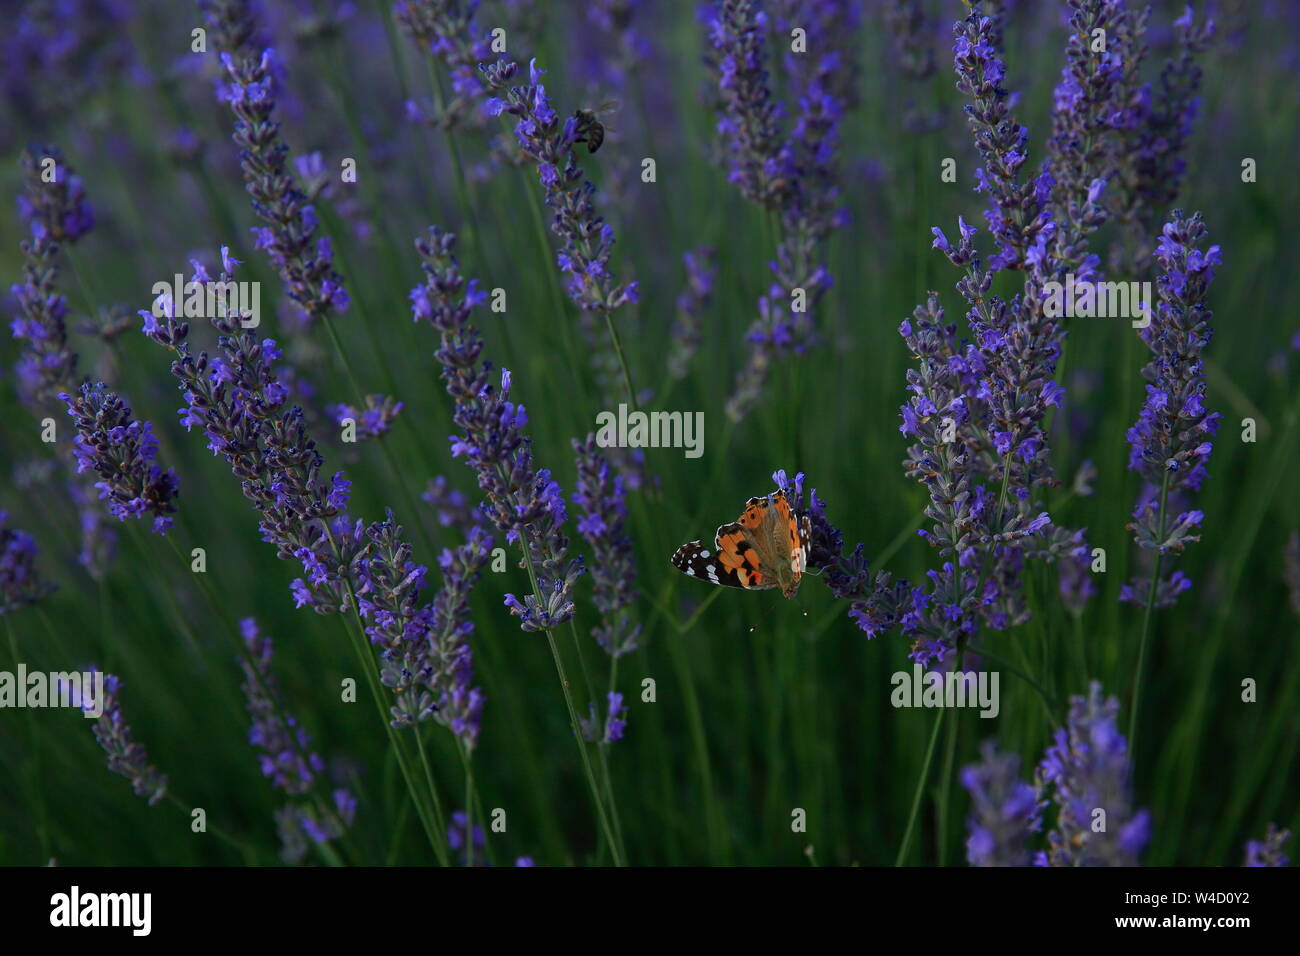 Lavender field. A field of ripe lavender to be harvested. close-up view. Stock Photo